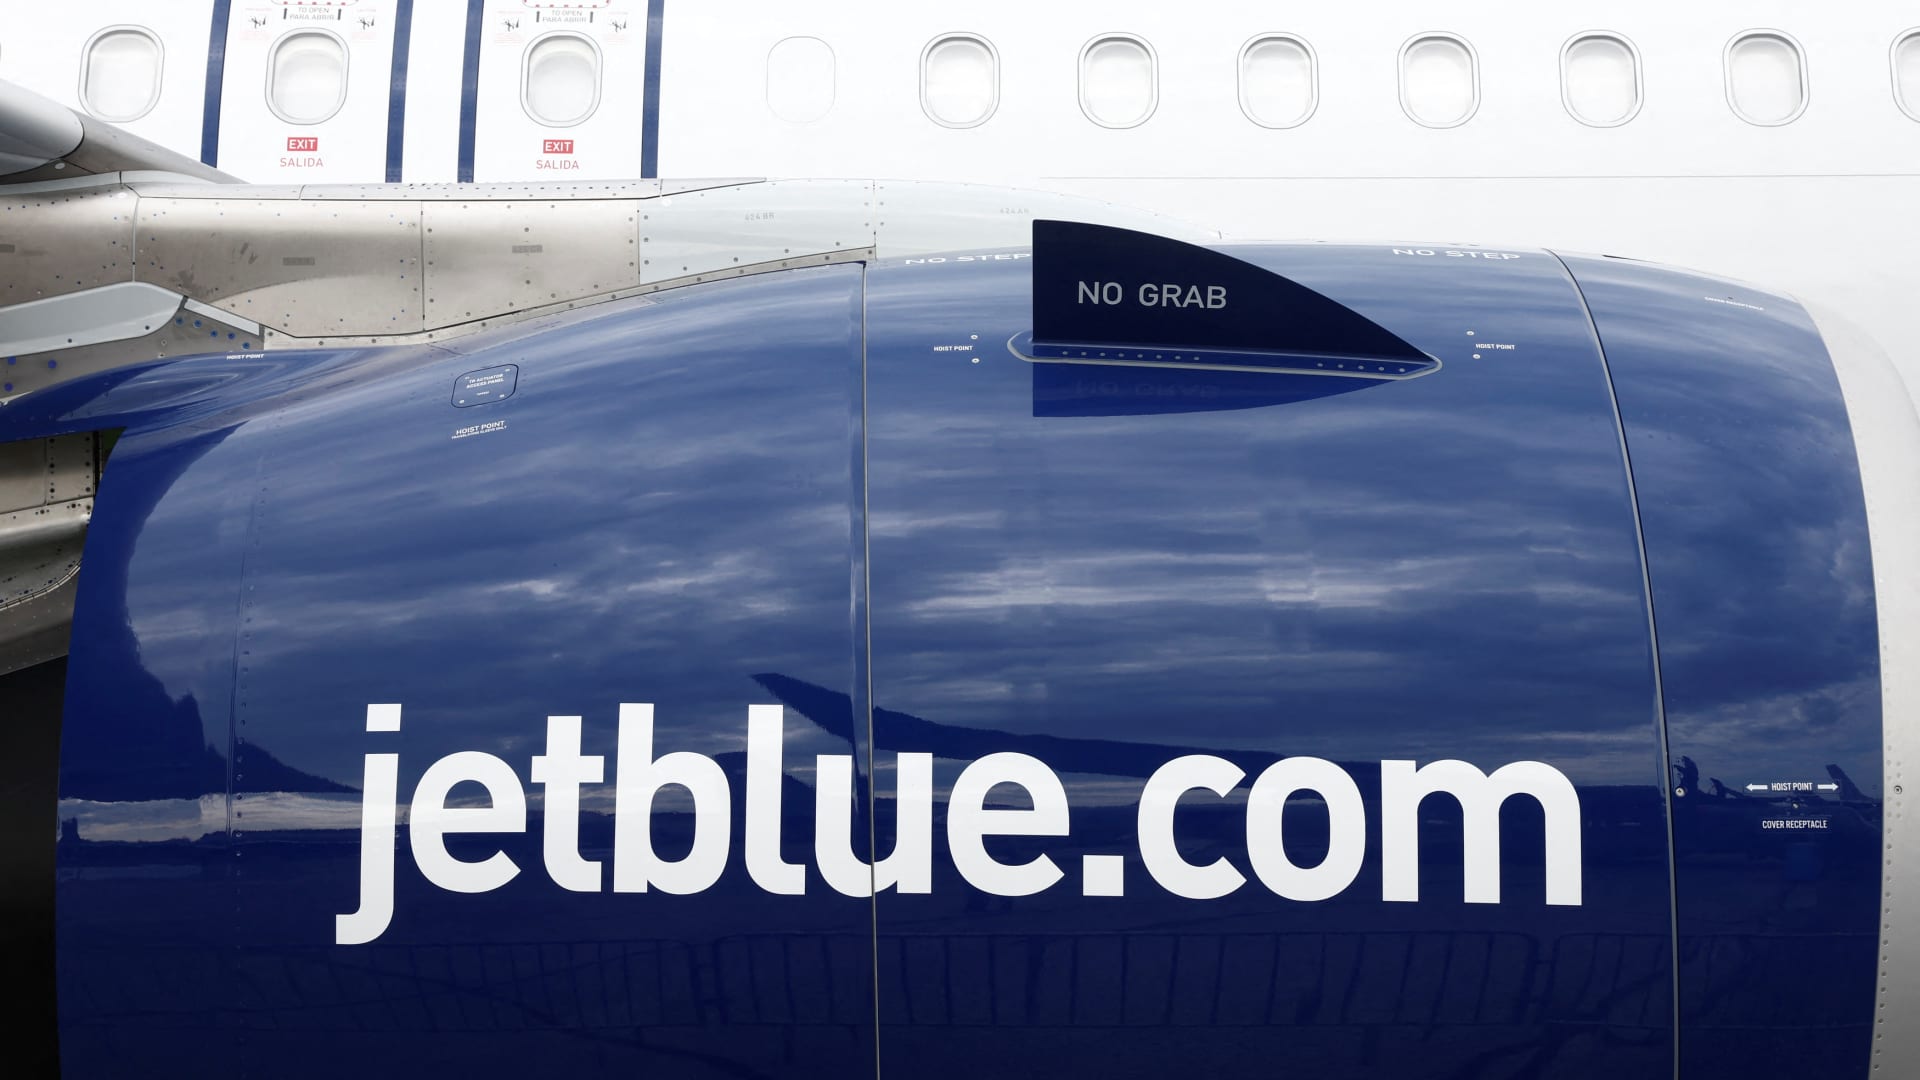 Carl Icahn gets two seats on JetBlueâs board. Hereâs how he may help build value